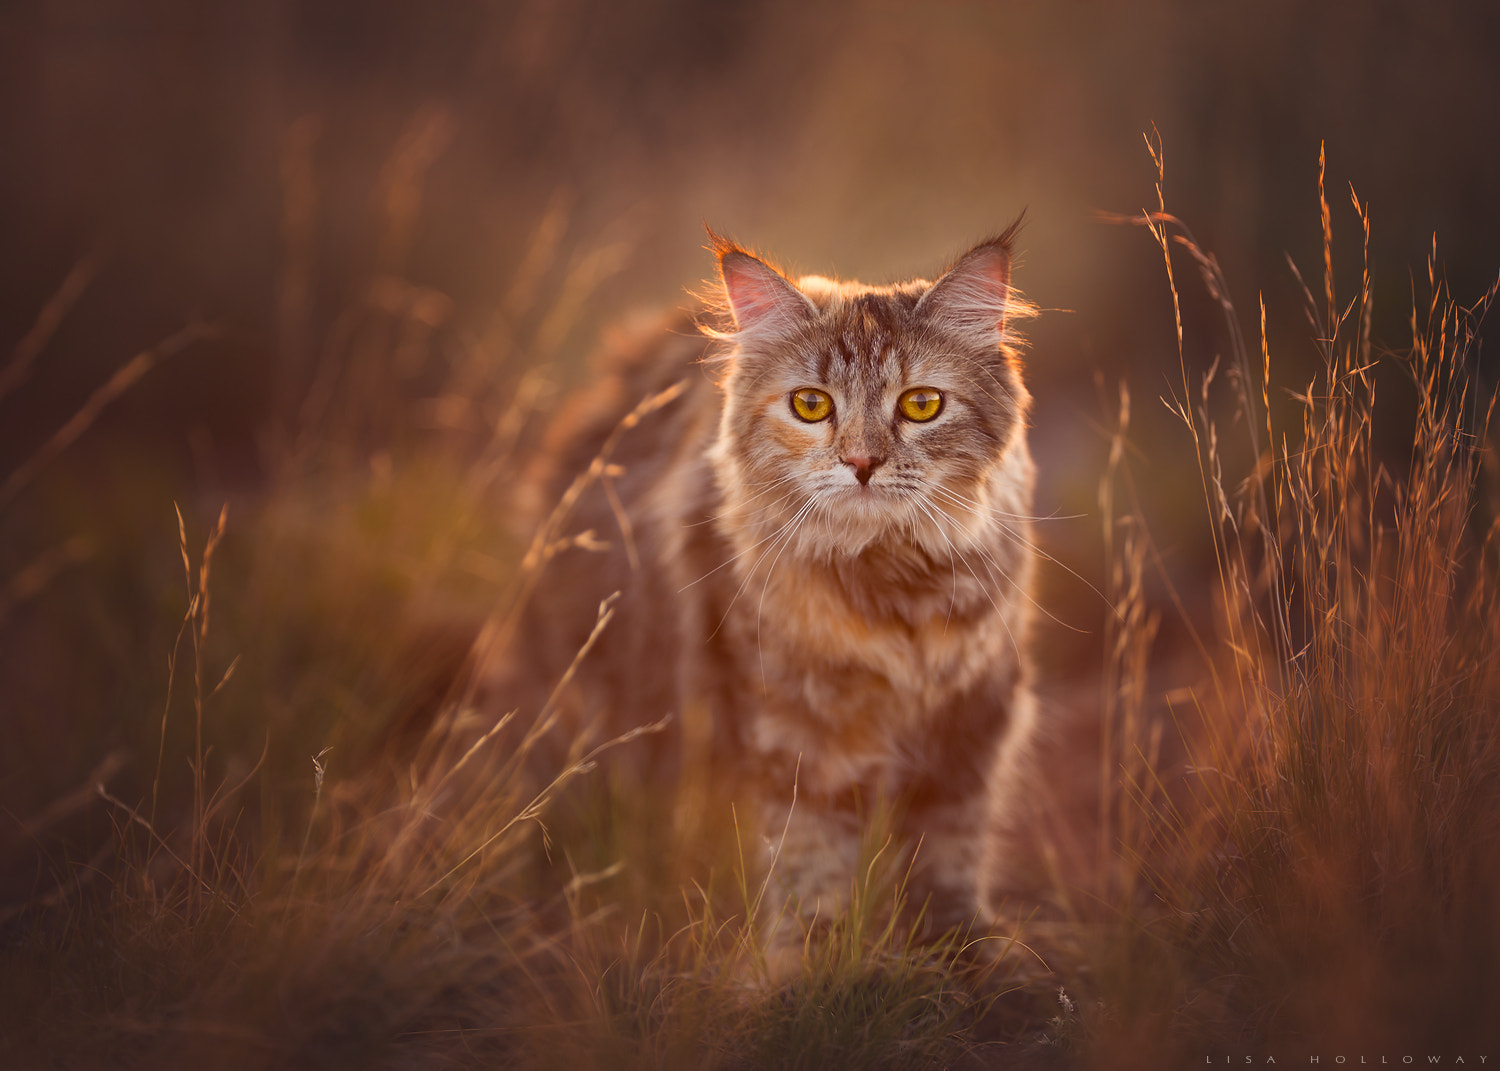 Dennis the Great by Lisa Holloway / 500px